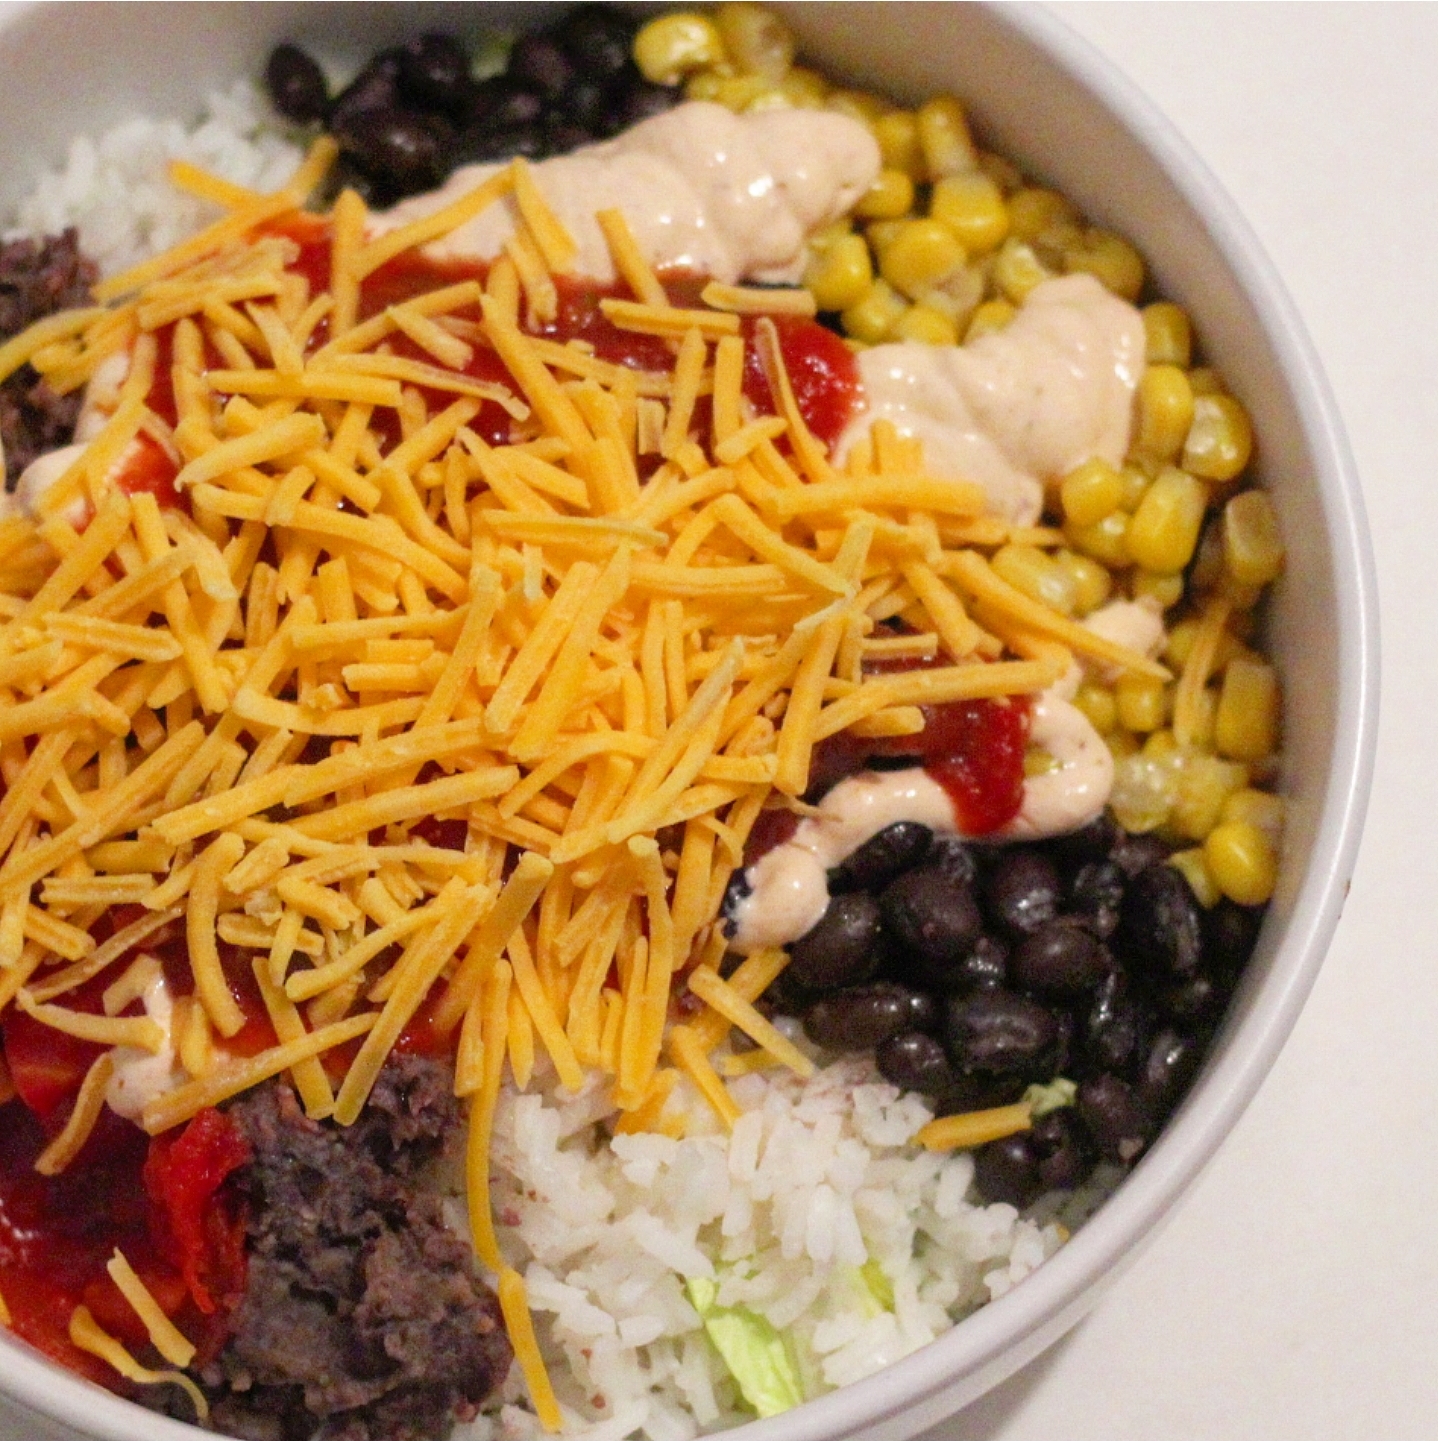 From My Kitchen: Burrito Bowl